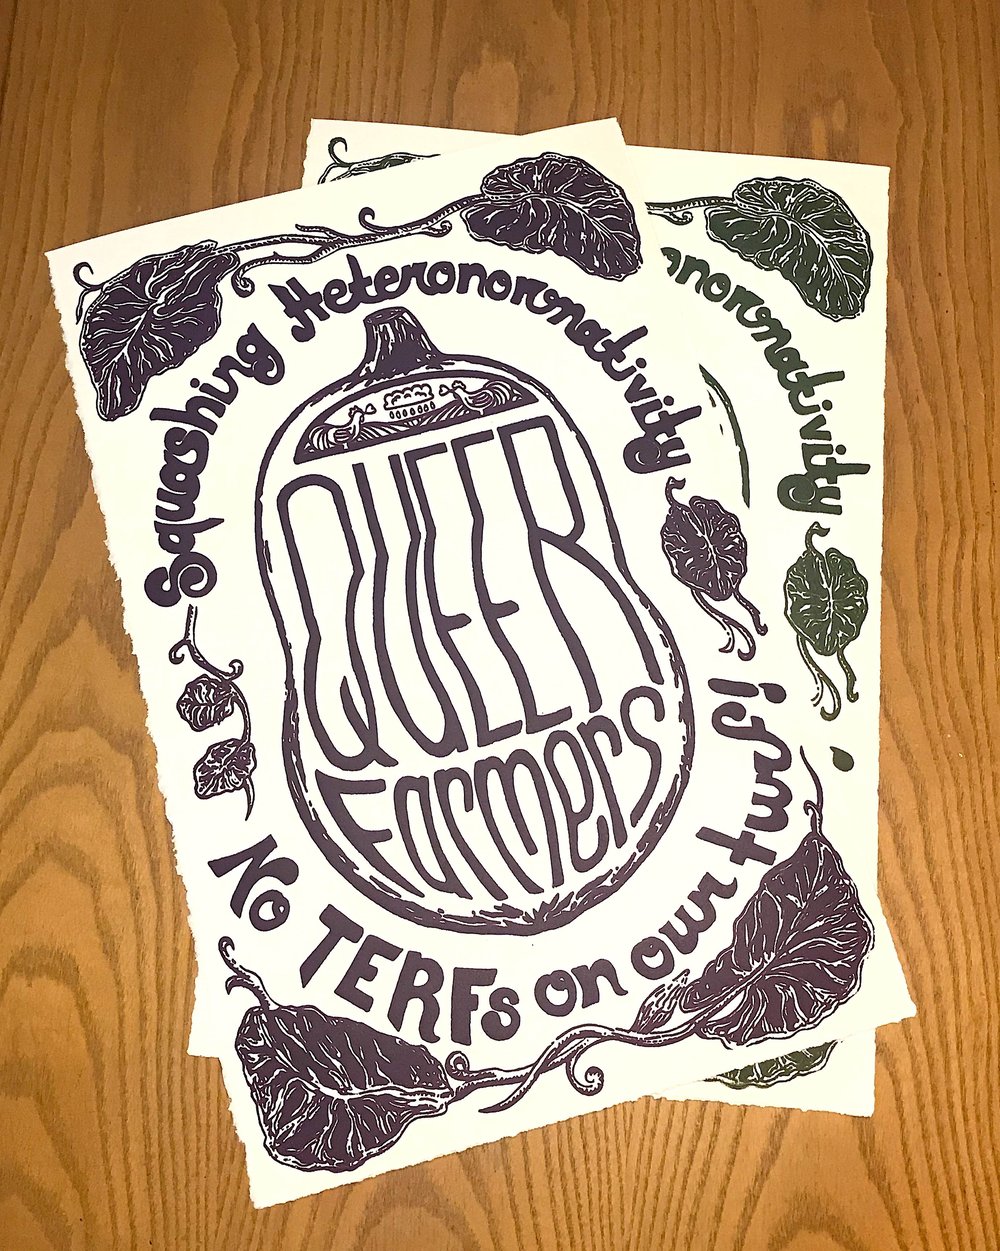 Queer Farmers Poster